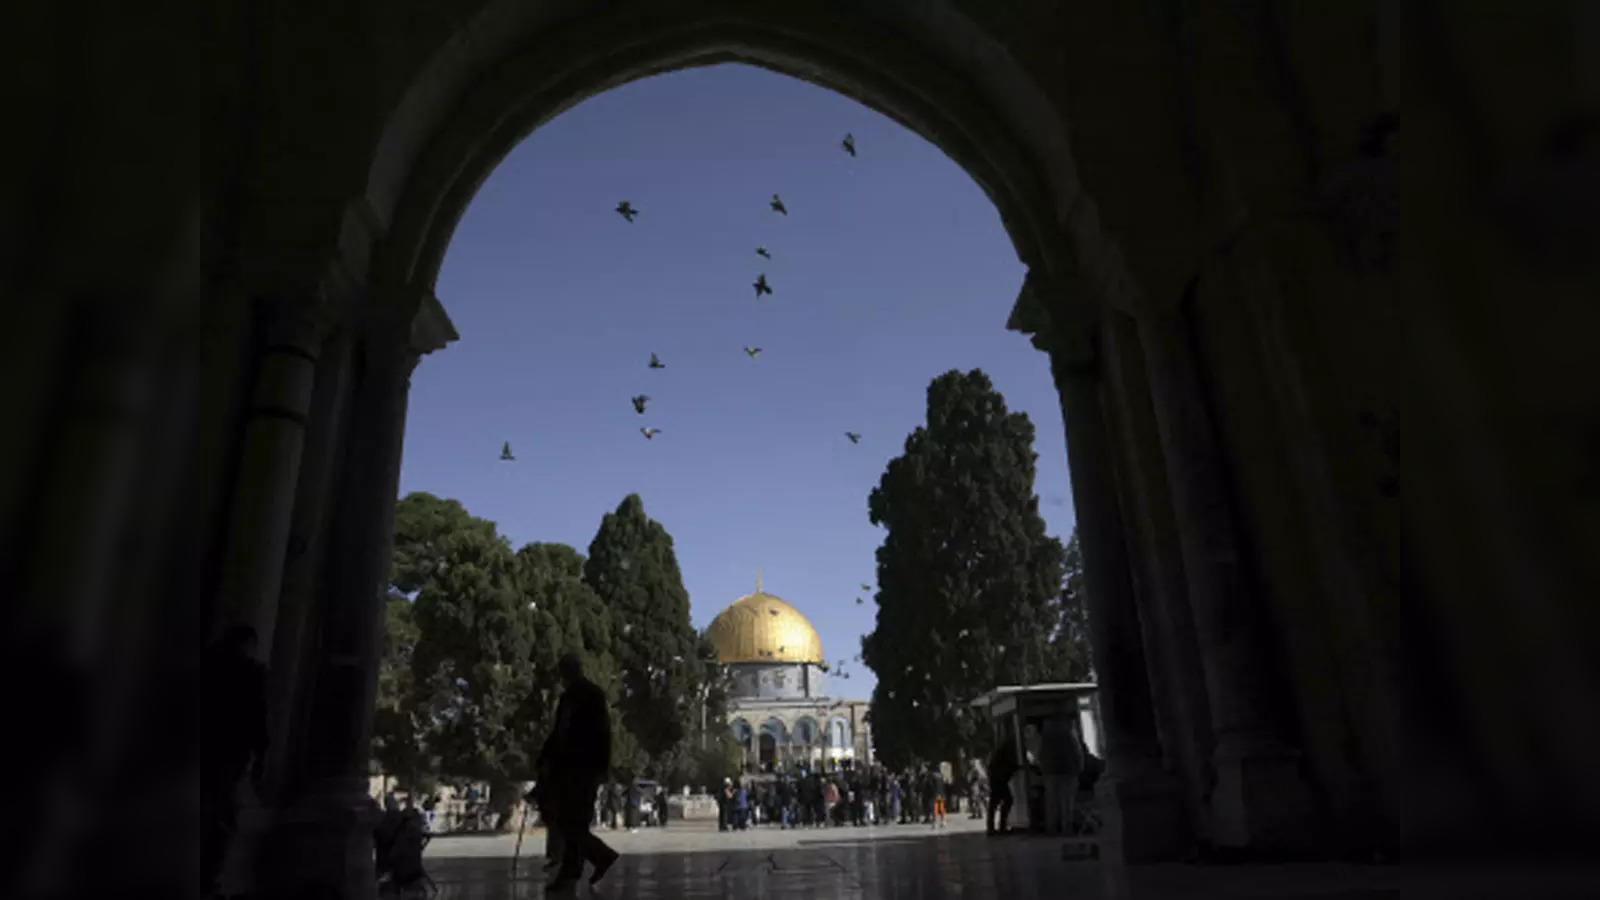 Why Is the City of Jerusalem Important in Islam?